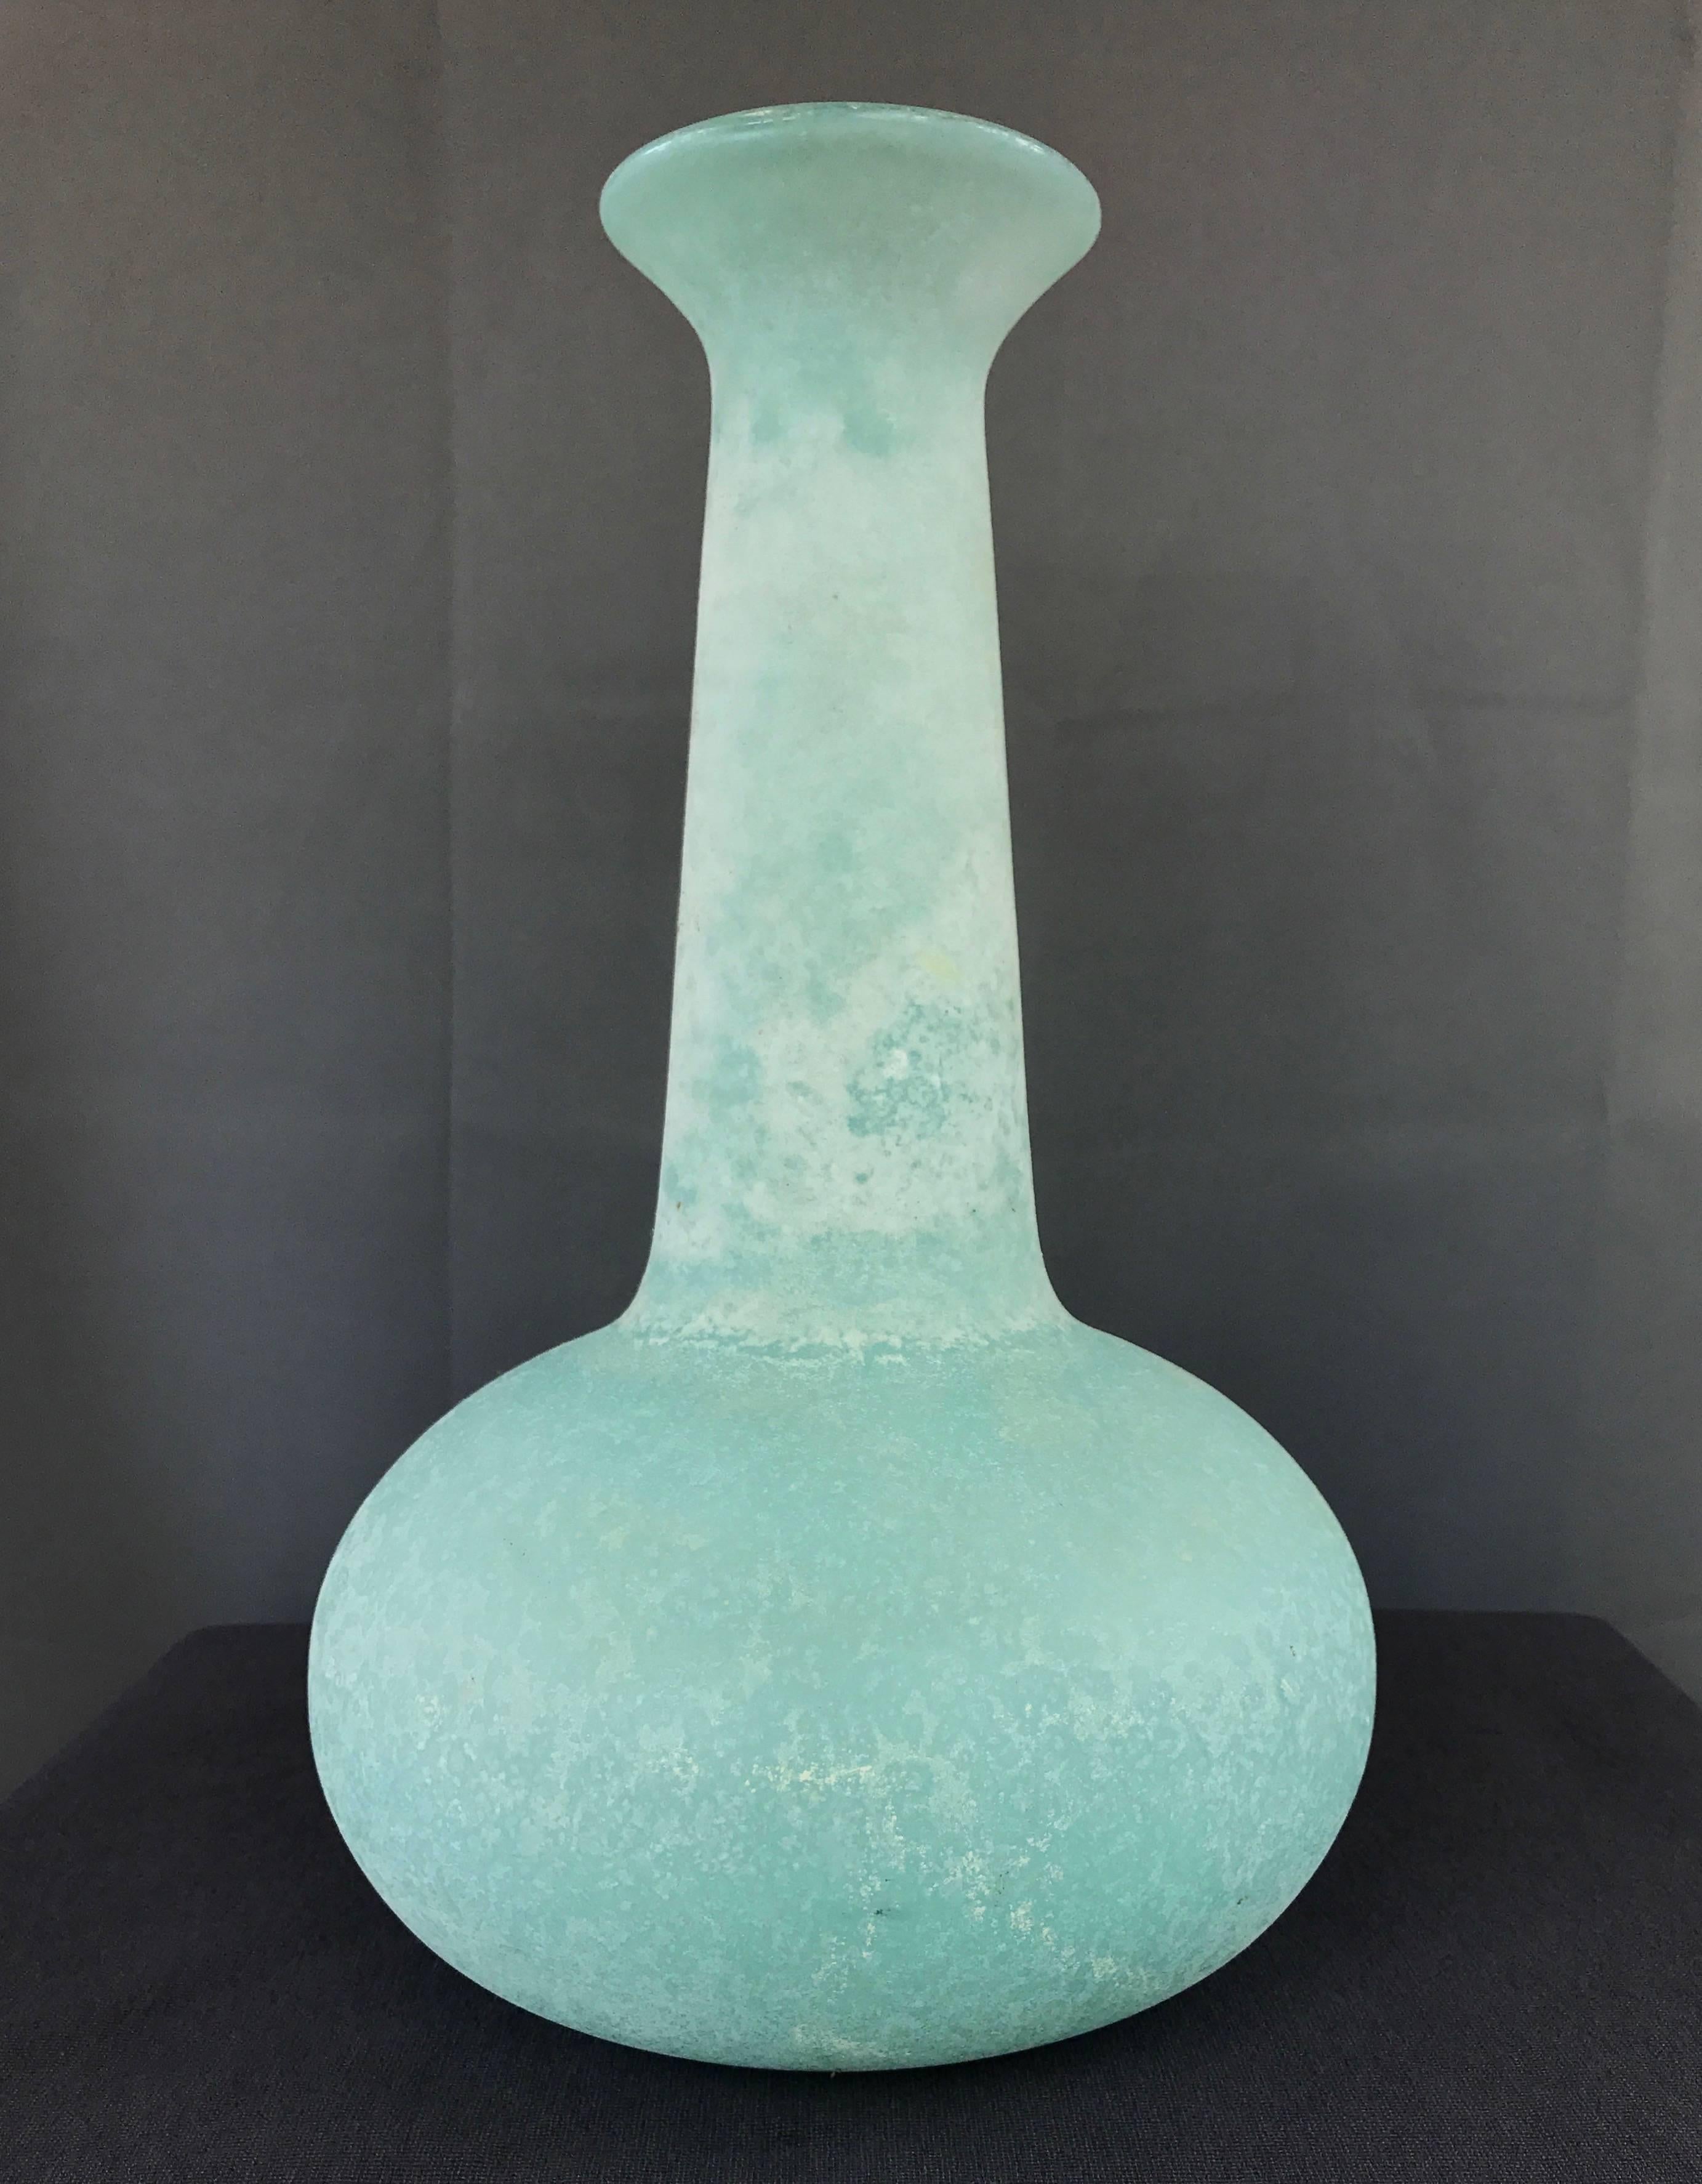 A tall scavo or corroso glass vase by Murano studio Cenedese.

Large handblown body has a bulb base and elongated neck with flared lip. Luminous powder blue color in combination with frosty white finish is evocative of glacial ice or an arctic